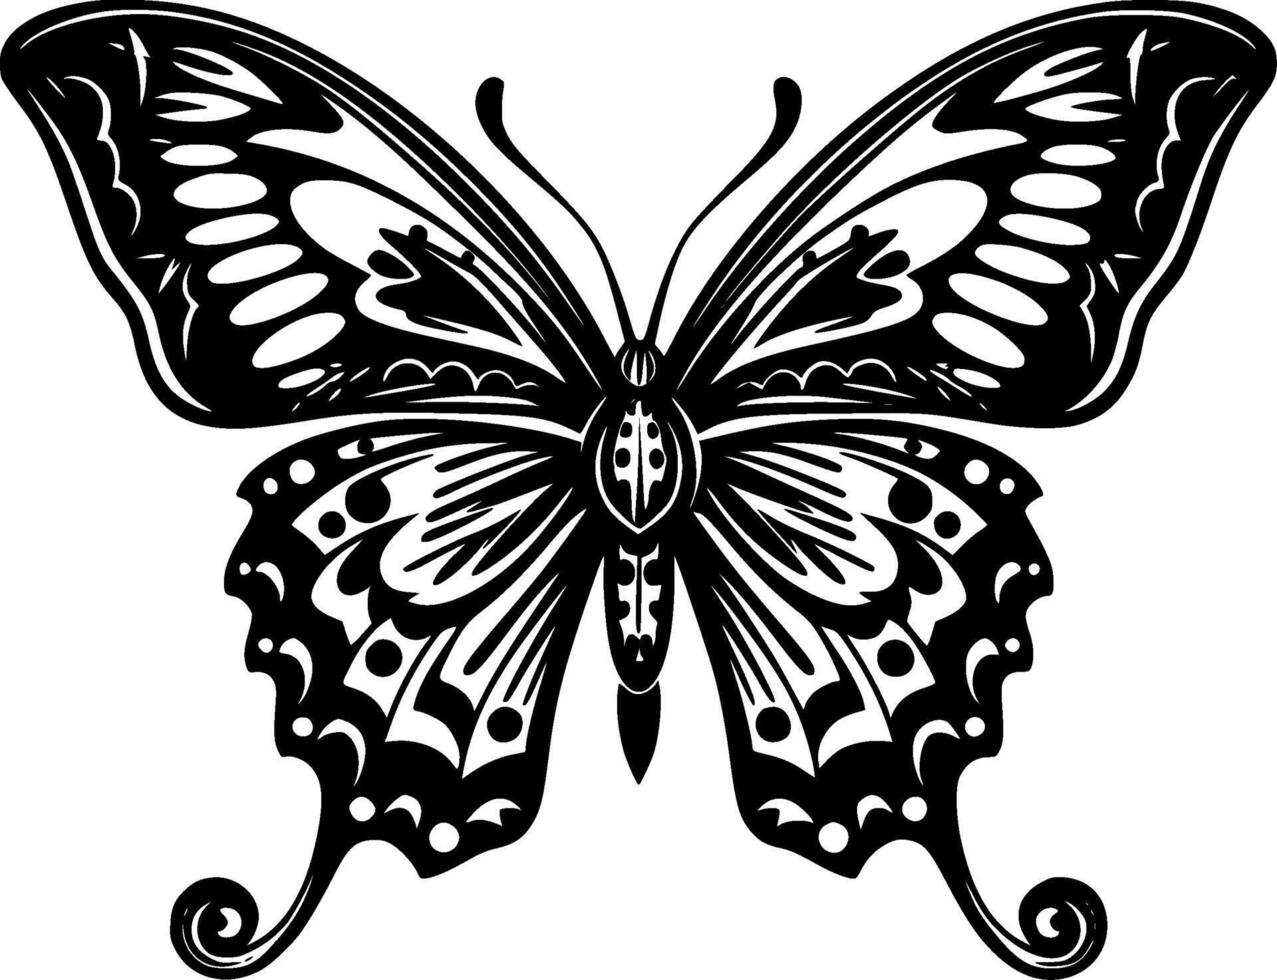 Butterfly - Black and White Isolated Icon - Vector illustration